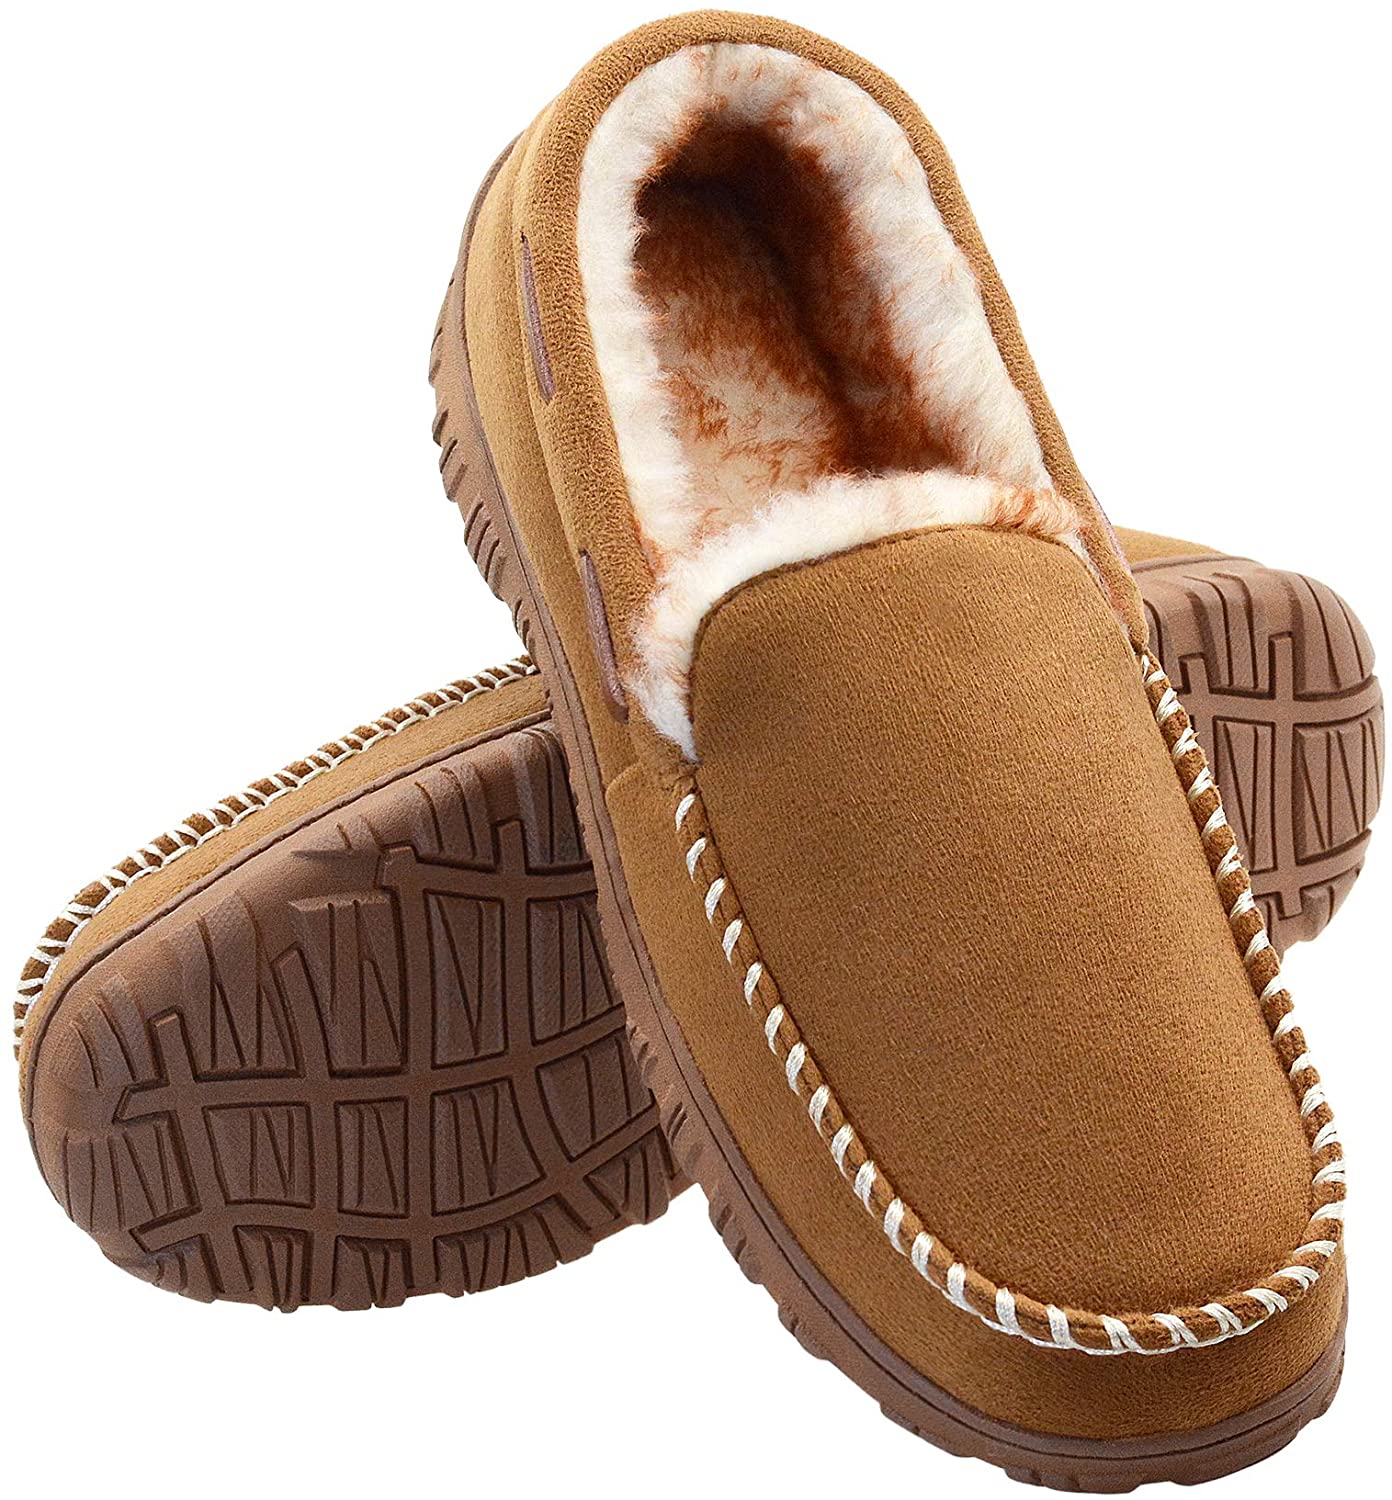 Men’s Comfy & Warm Wool Micro Suede Plush Fleece Lined Moccasin Slippers Hous... 